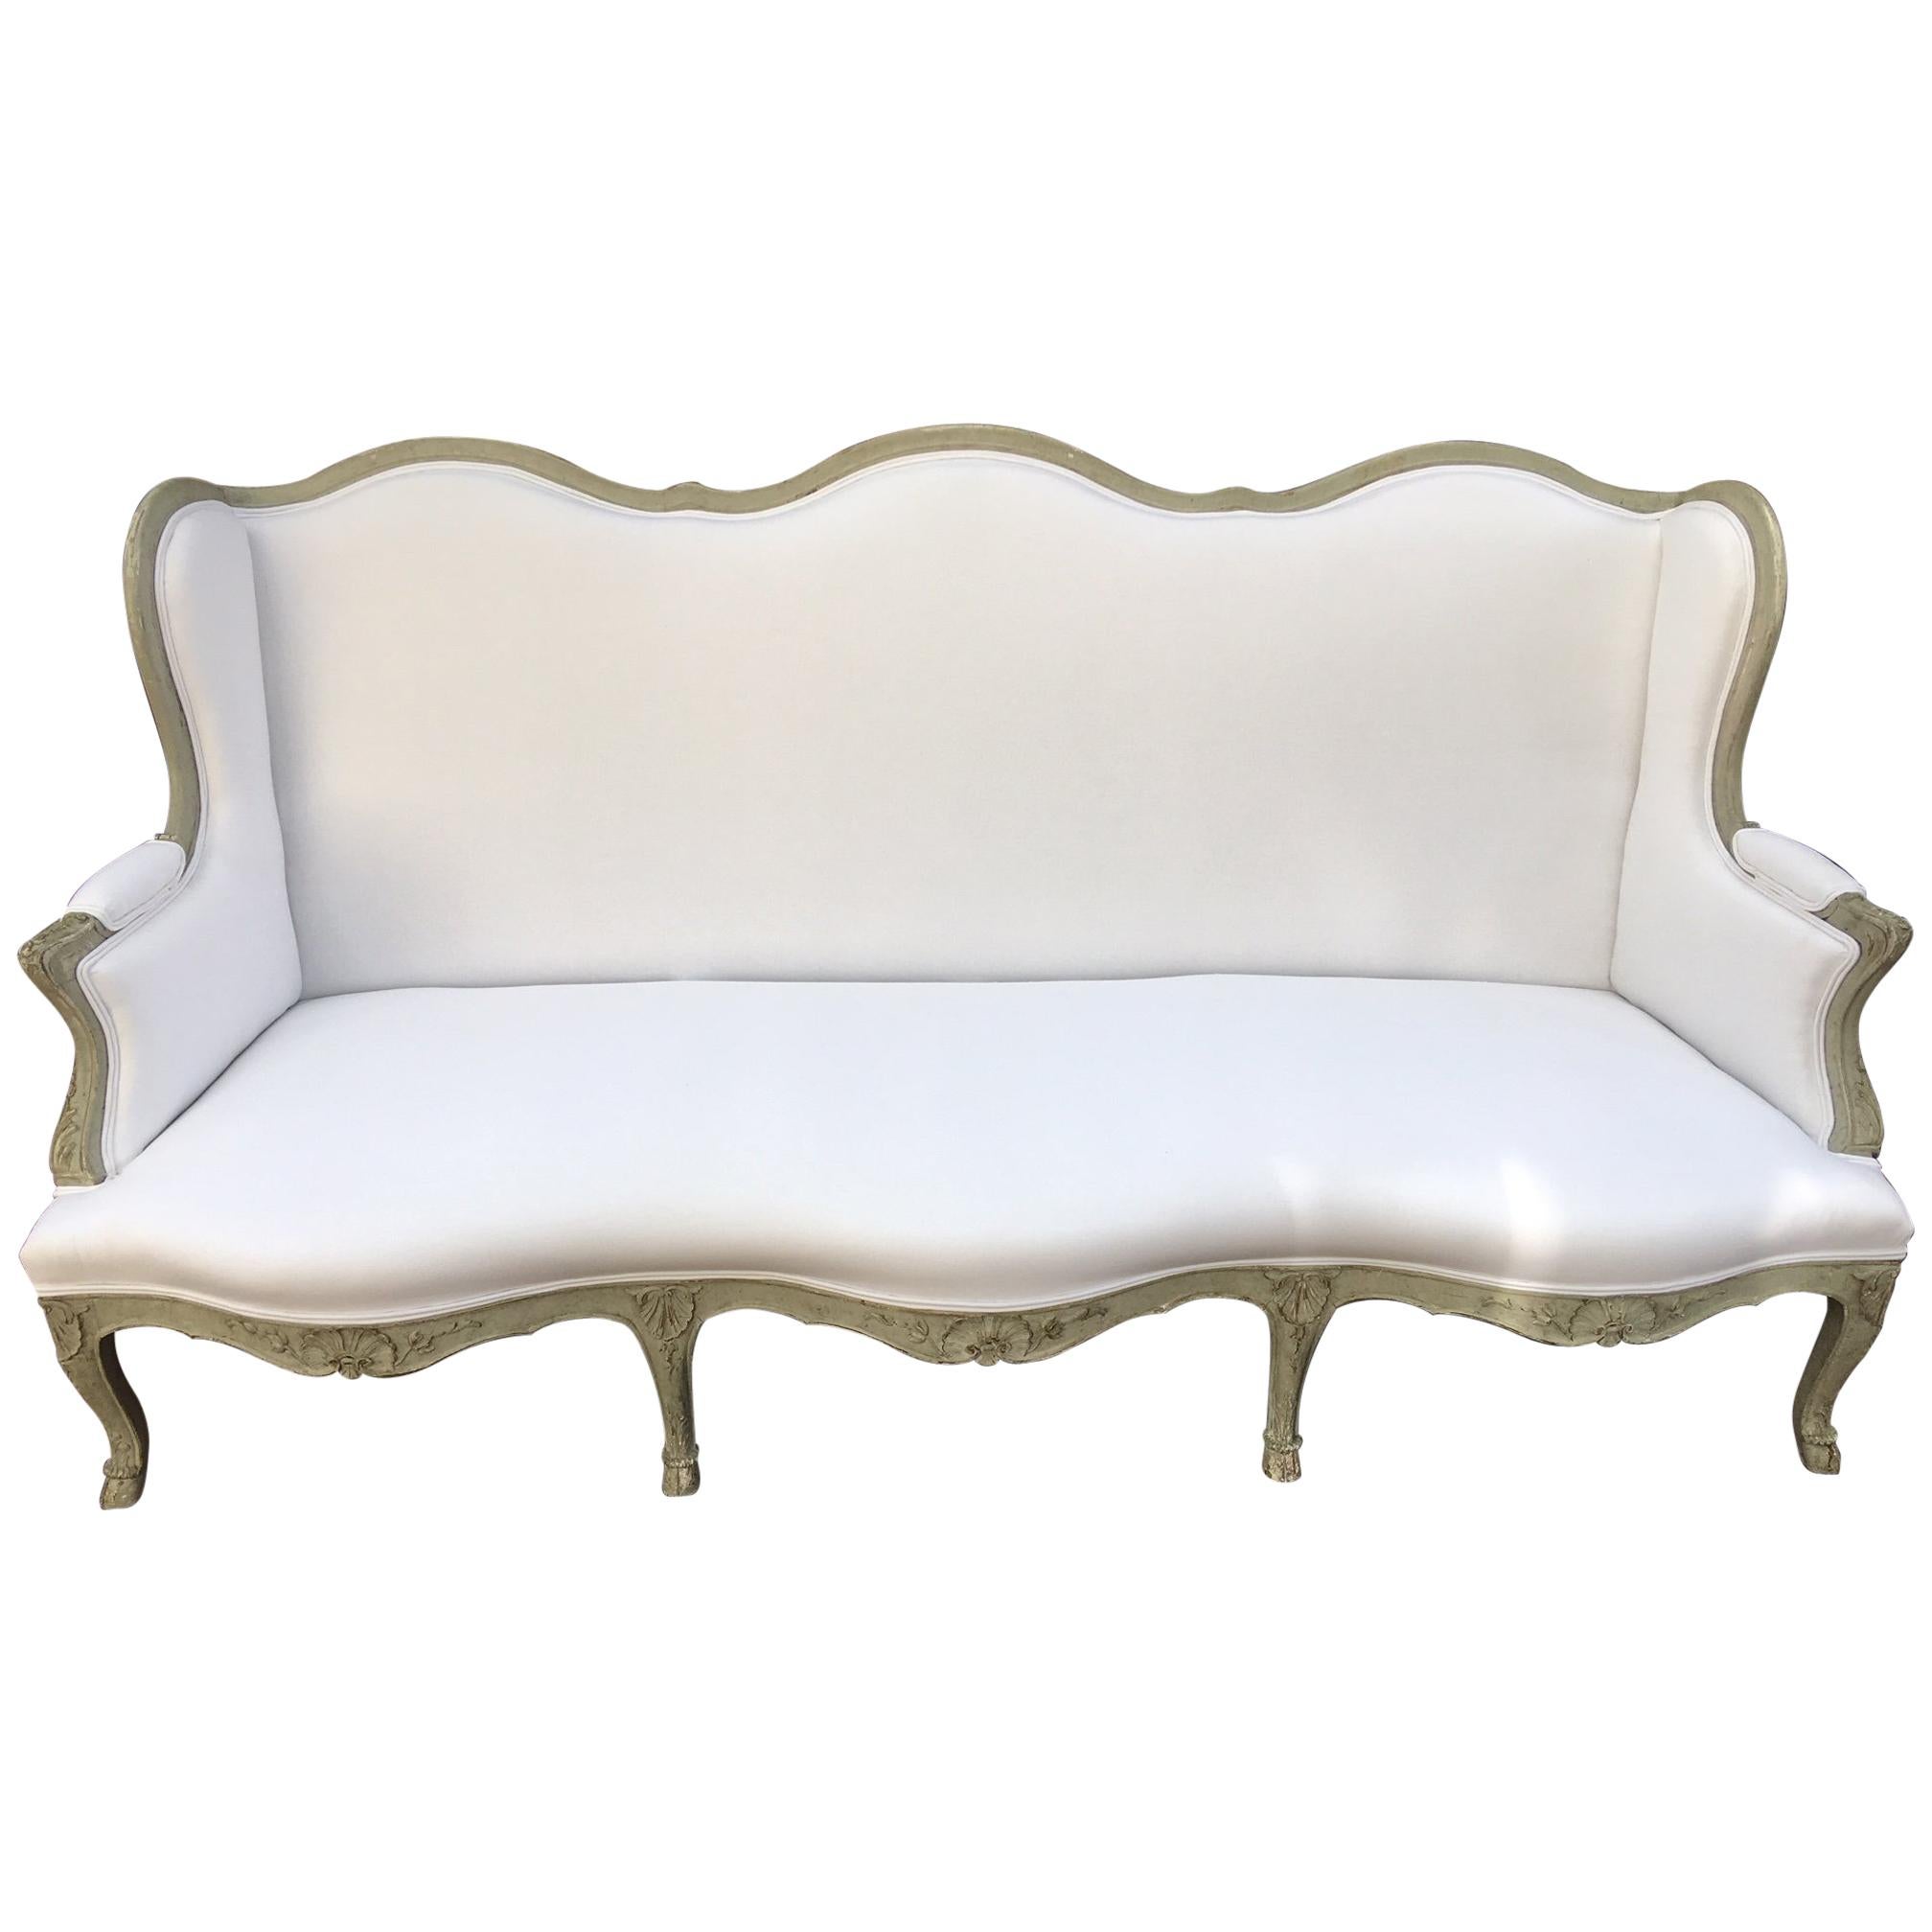 French Louis XVI Style Painted Settee or Sofa with Carving Detail, 19th Century